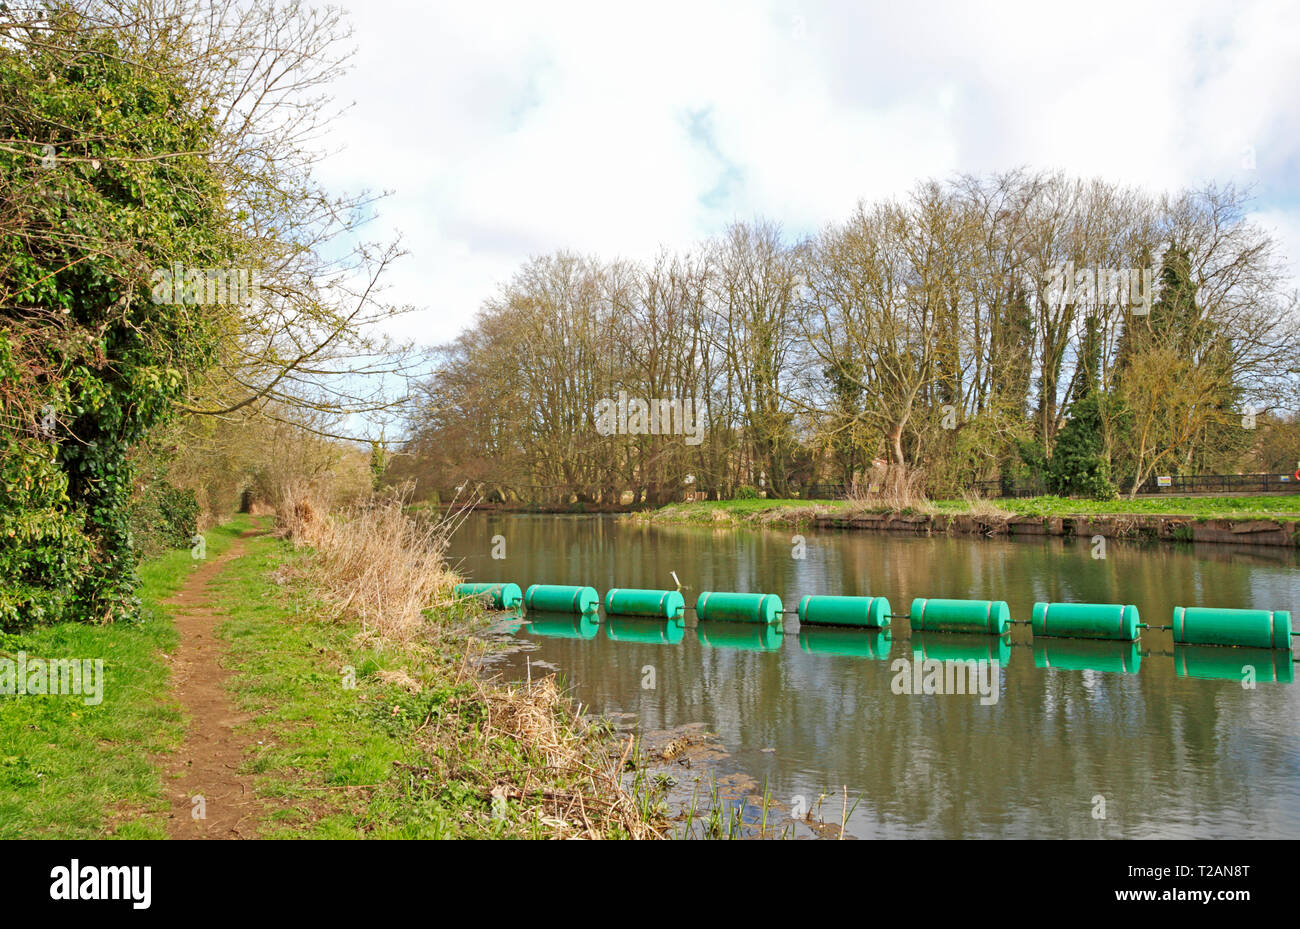 A view of the River Bure with boom and riverside footpath upstream of the old mill at Horstead, Norfolk, England, United Kingdom, Europe. Stock Photo